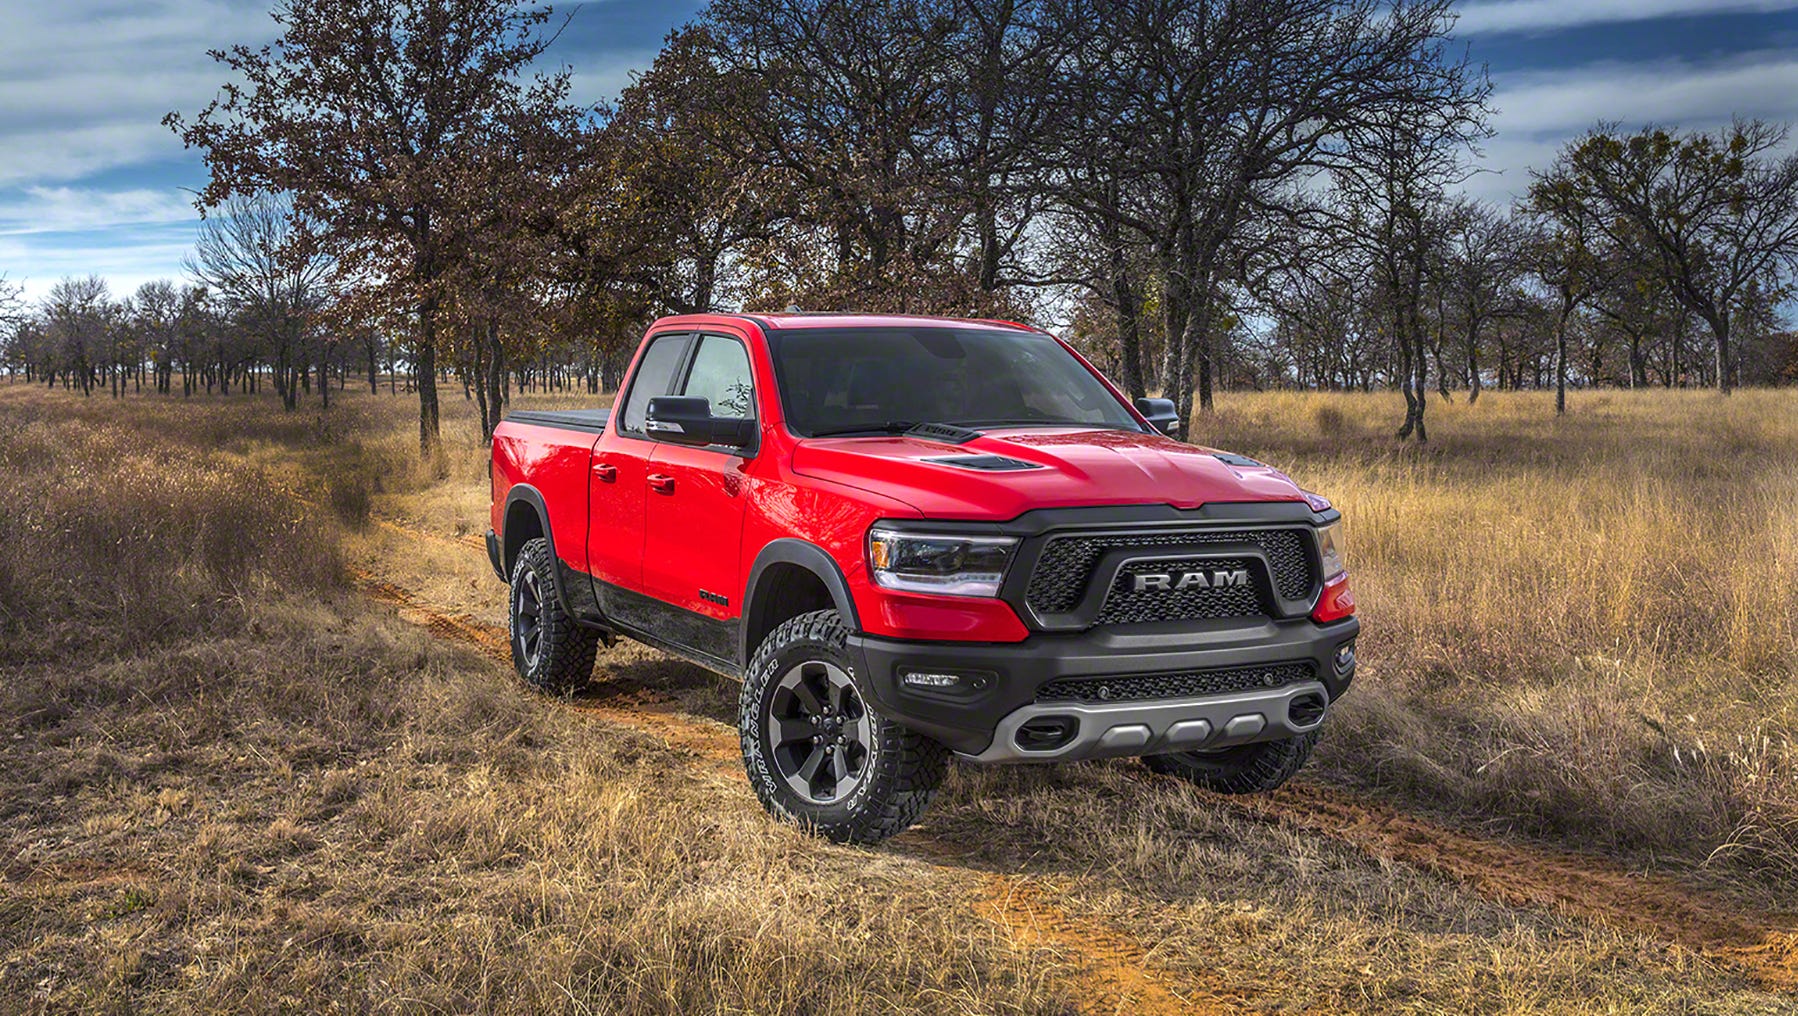 2019 Ram 1500 adds features, weight, links mild hybrid